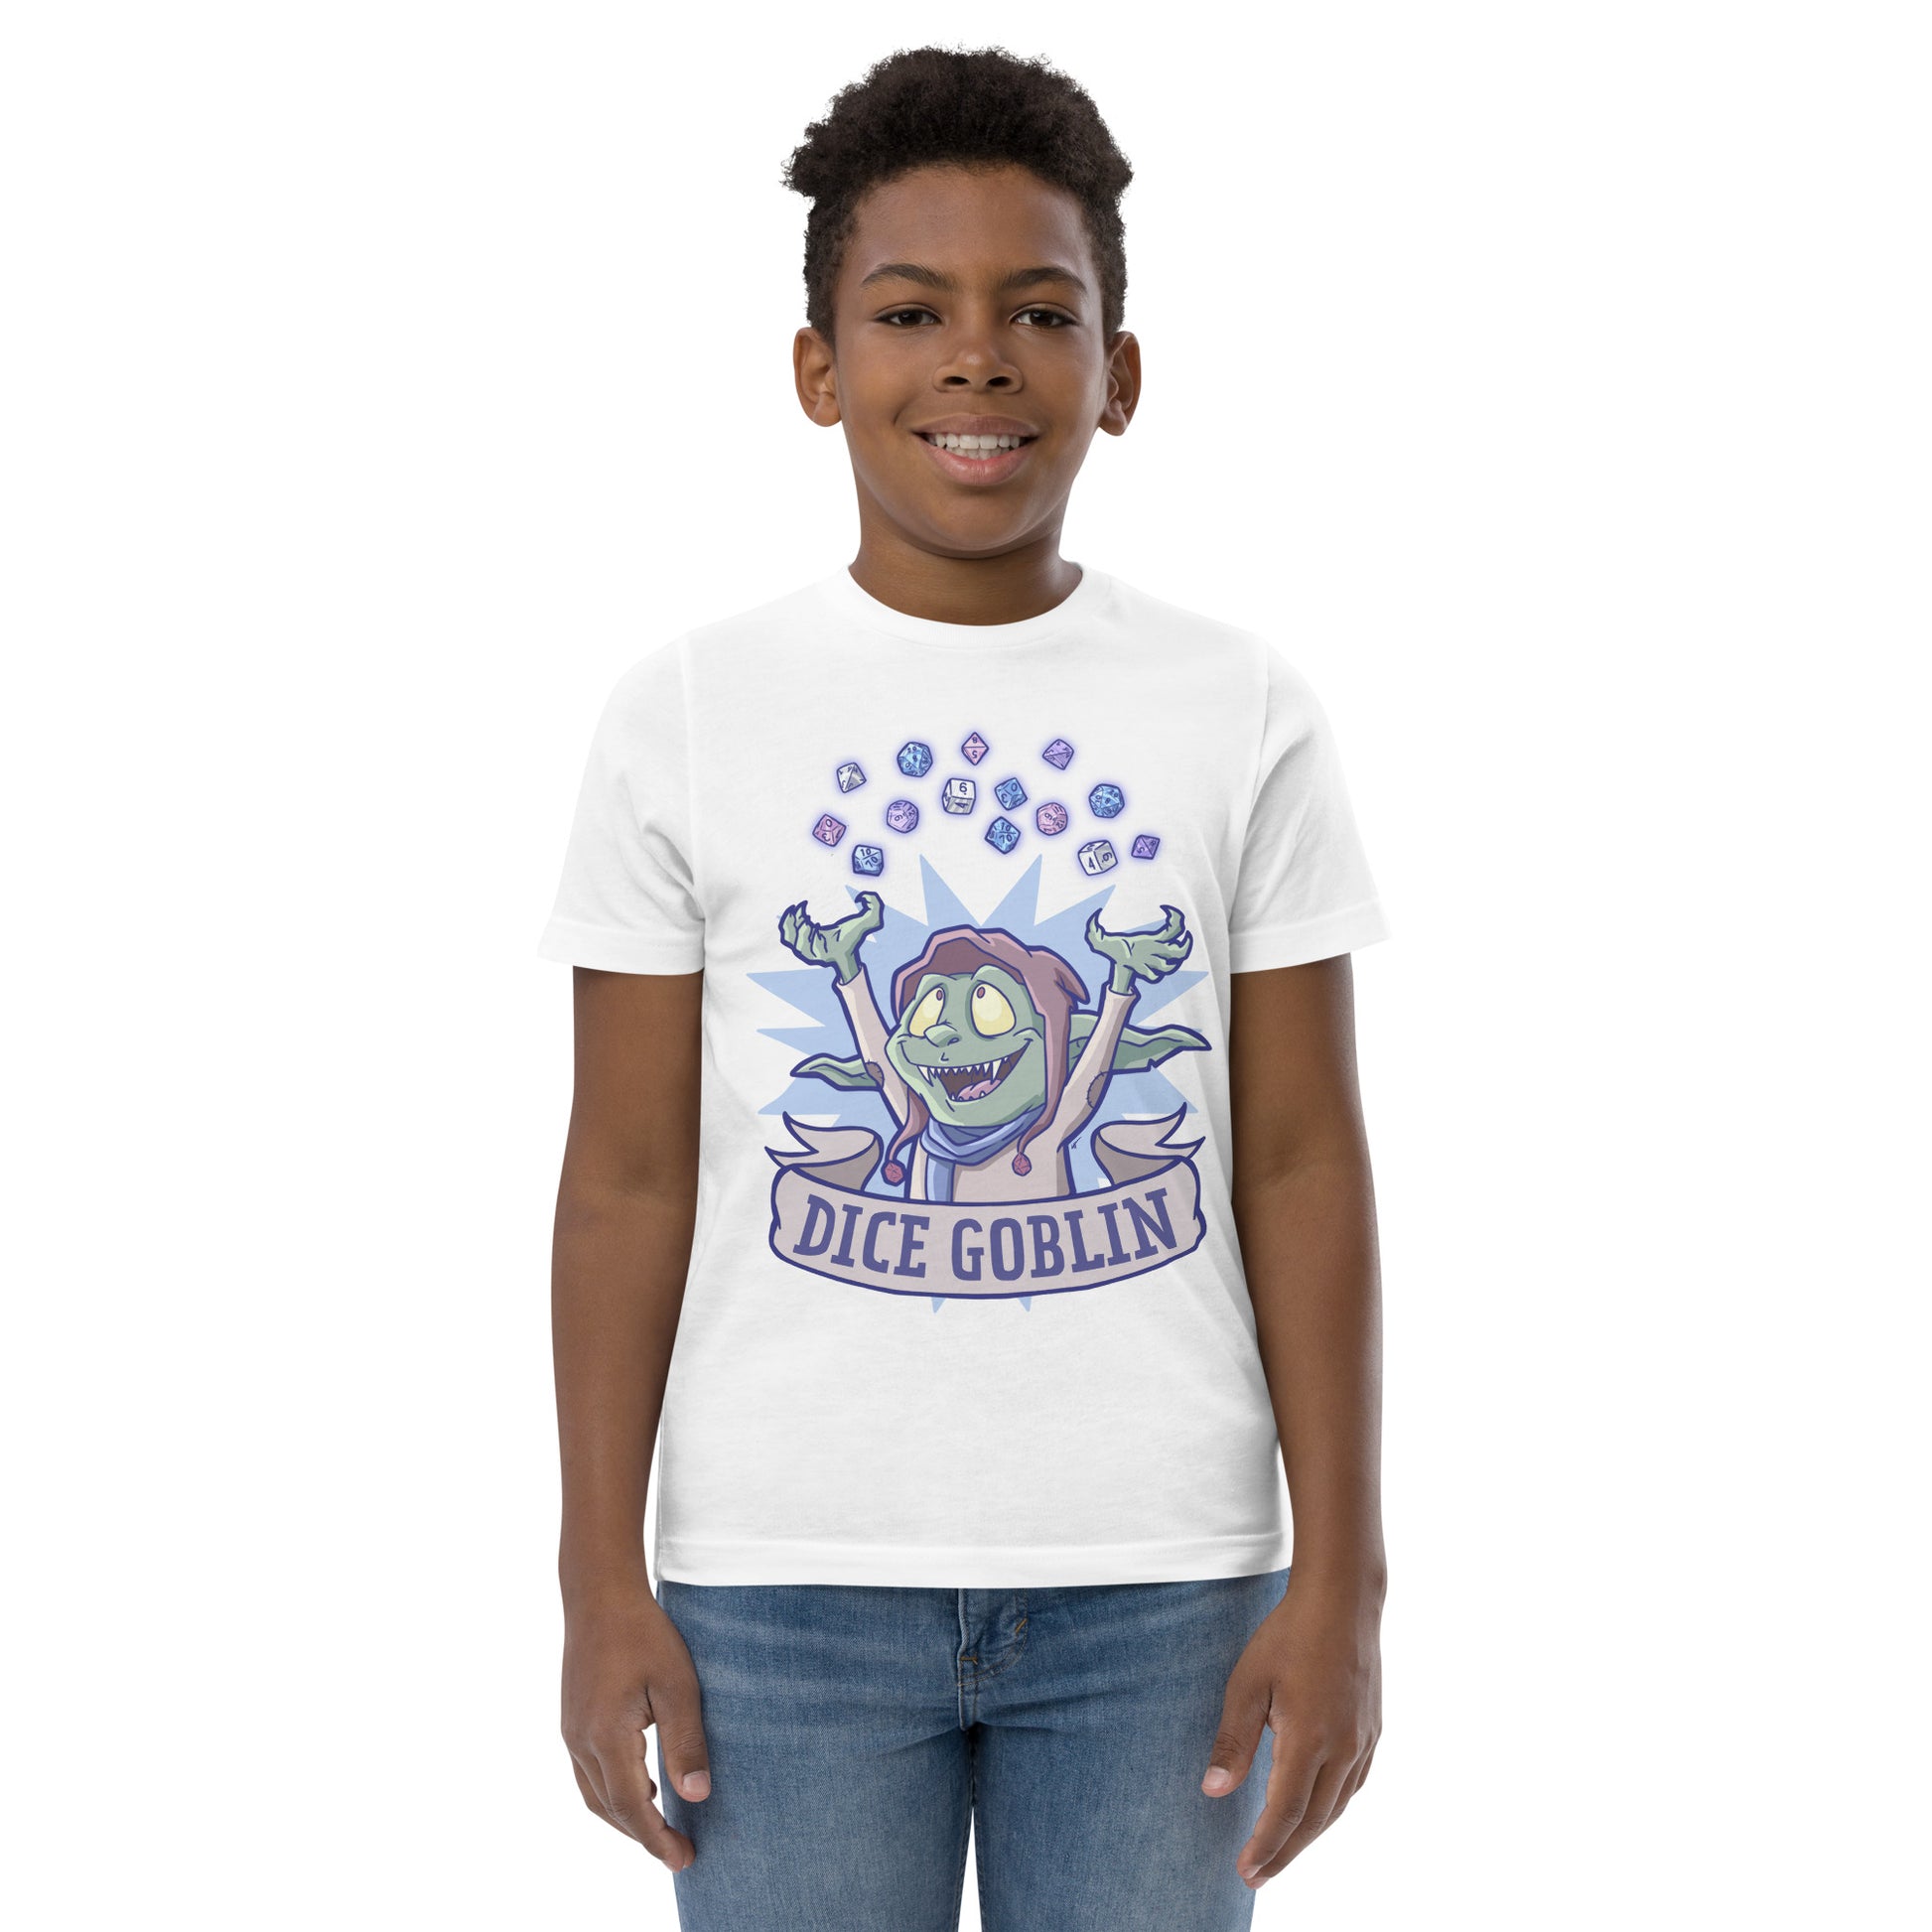 Dice Goblin Youth t-shirt  Level 1 Gamers White XS 